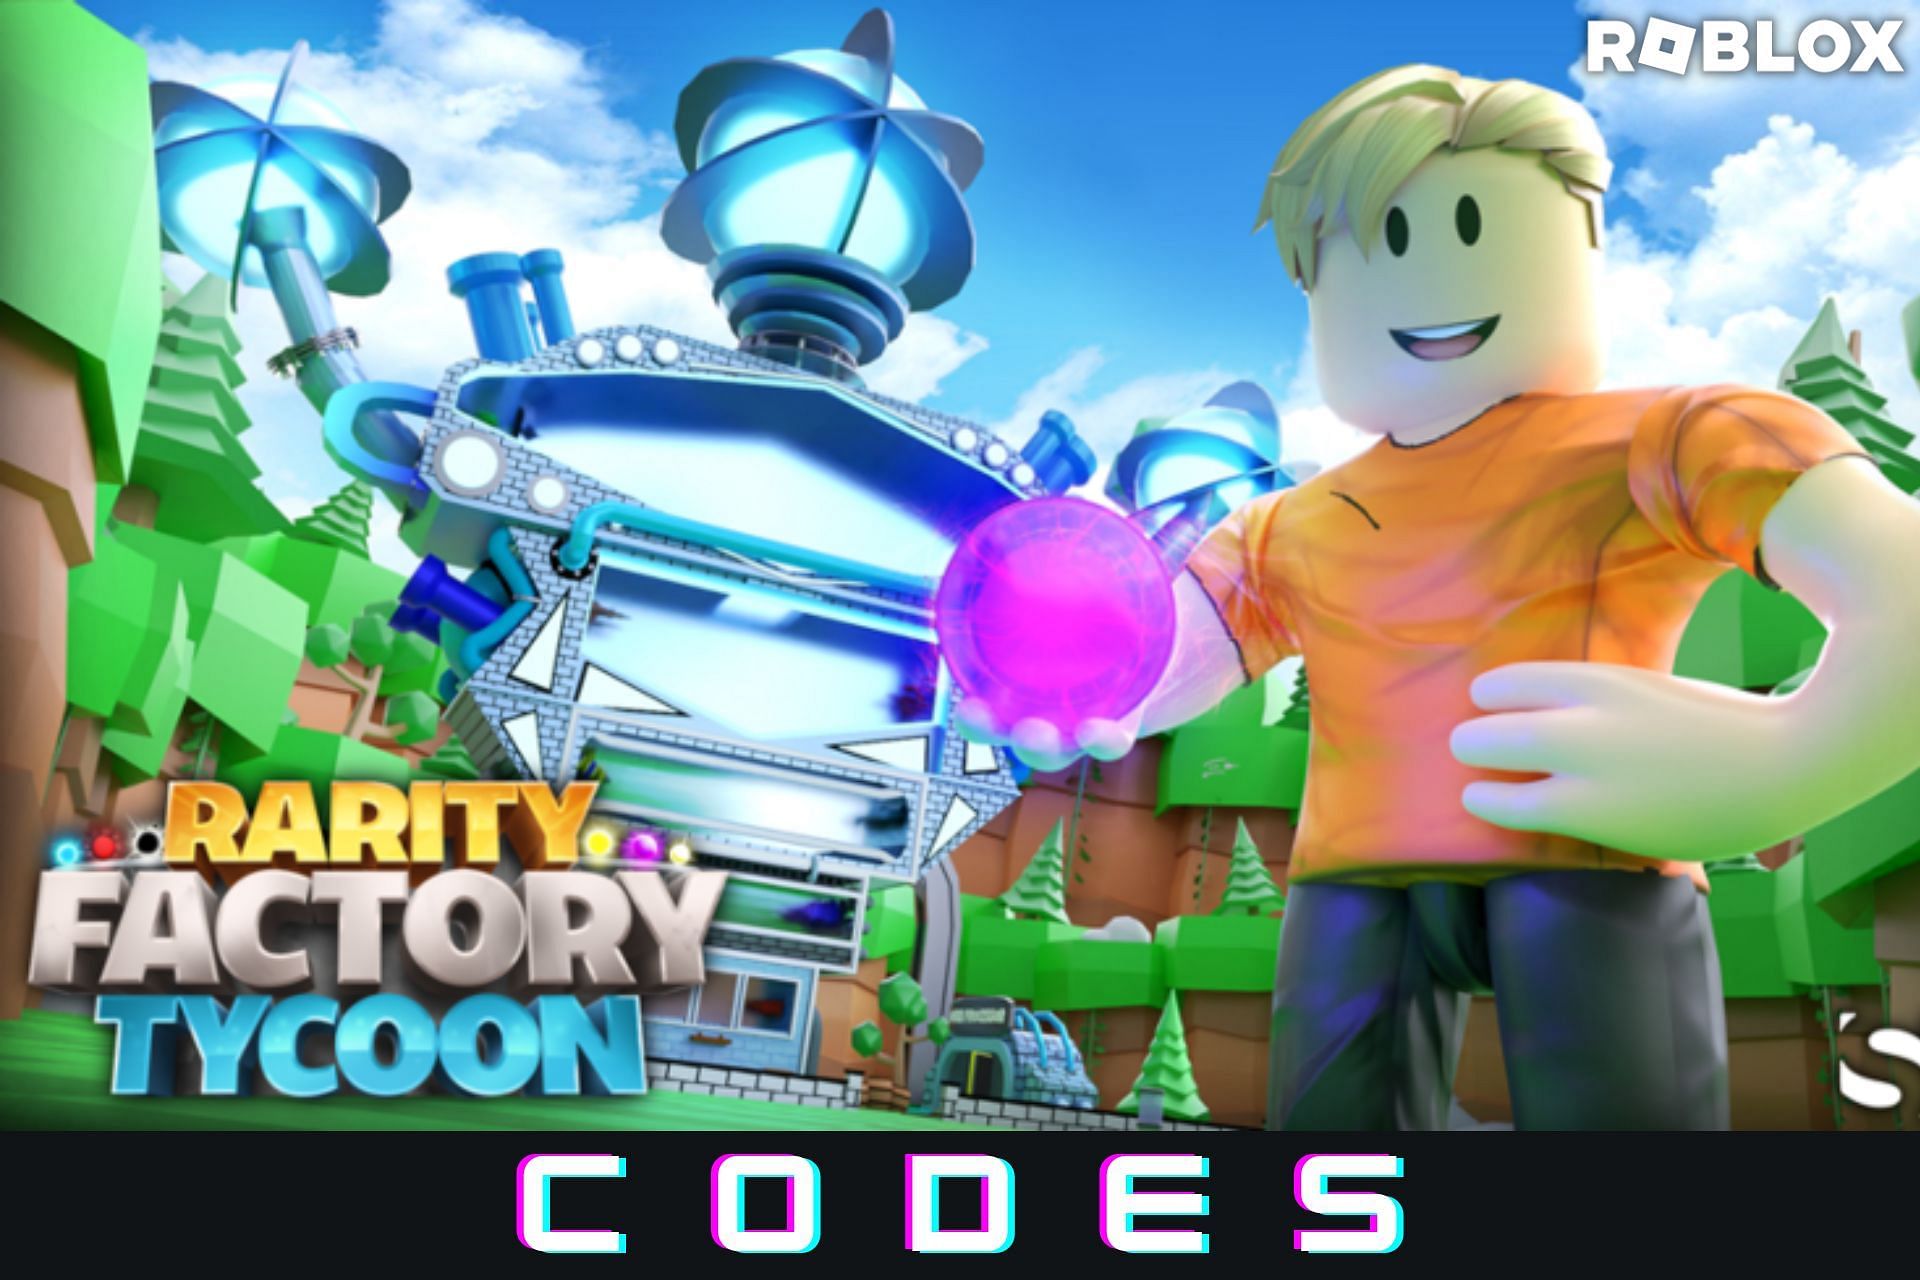 2022 *5 NEW* ROBLOX PROMO CODES All Free ROBUX Items in JANUARY + EVENT